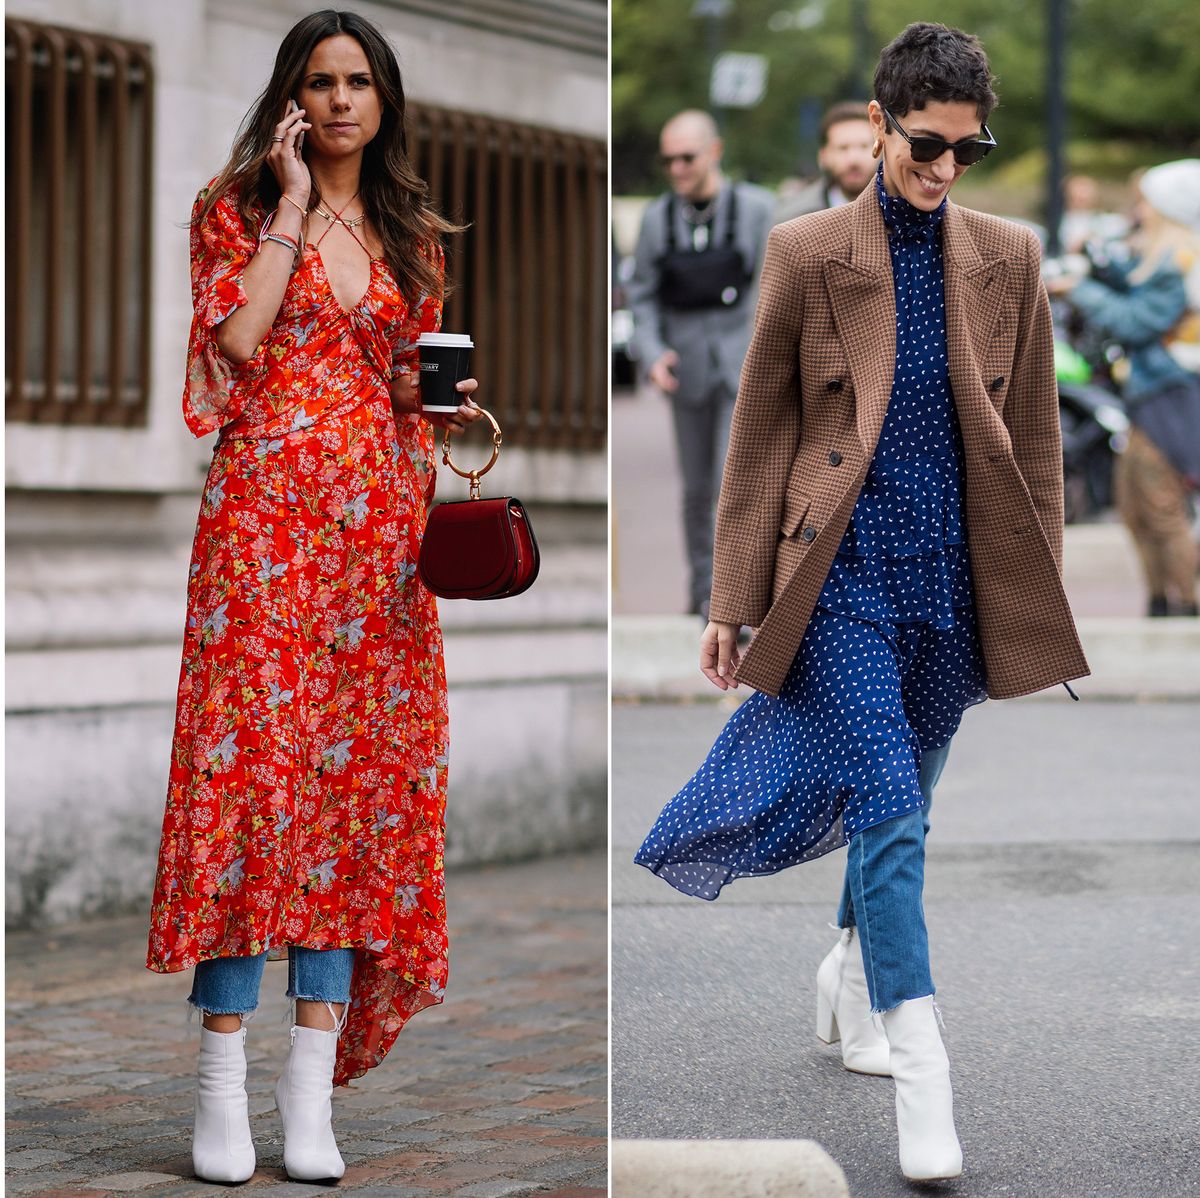 How to wear dresses over jeans – Styling advice for wearing